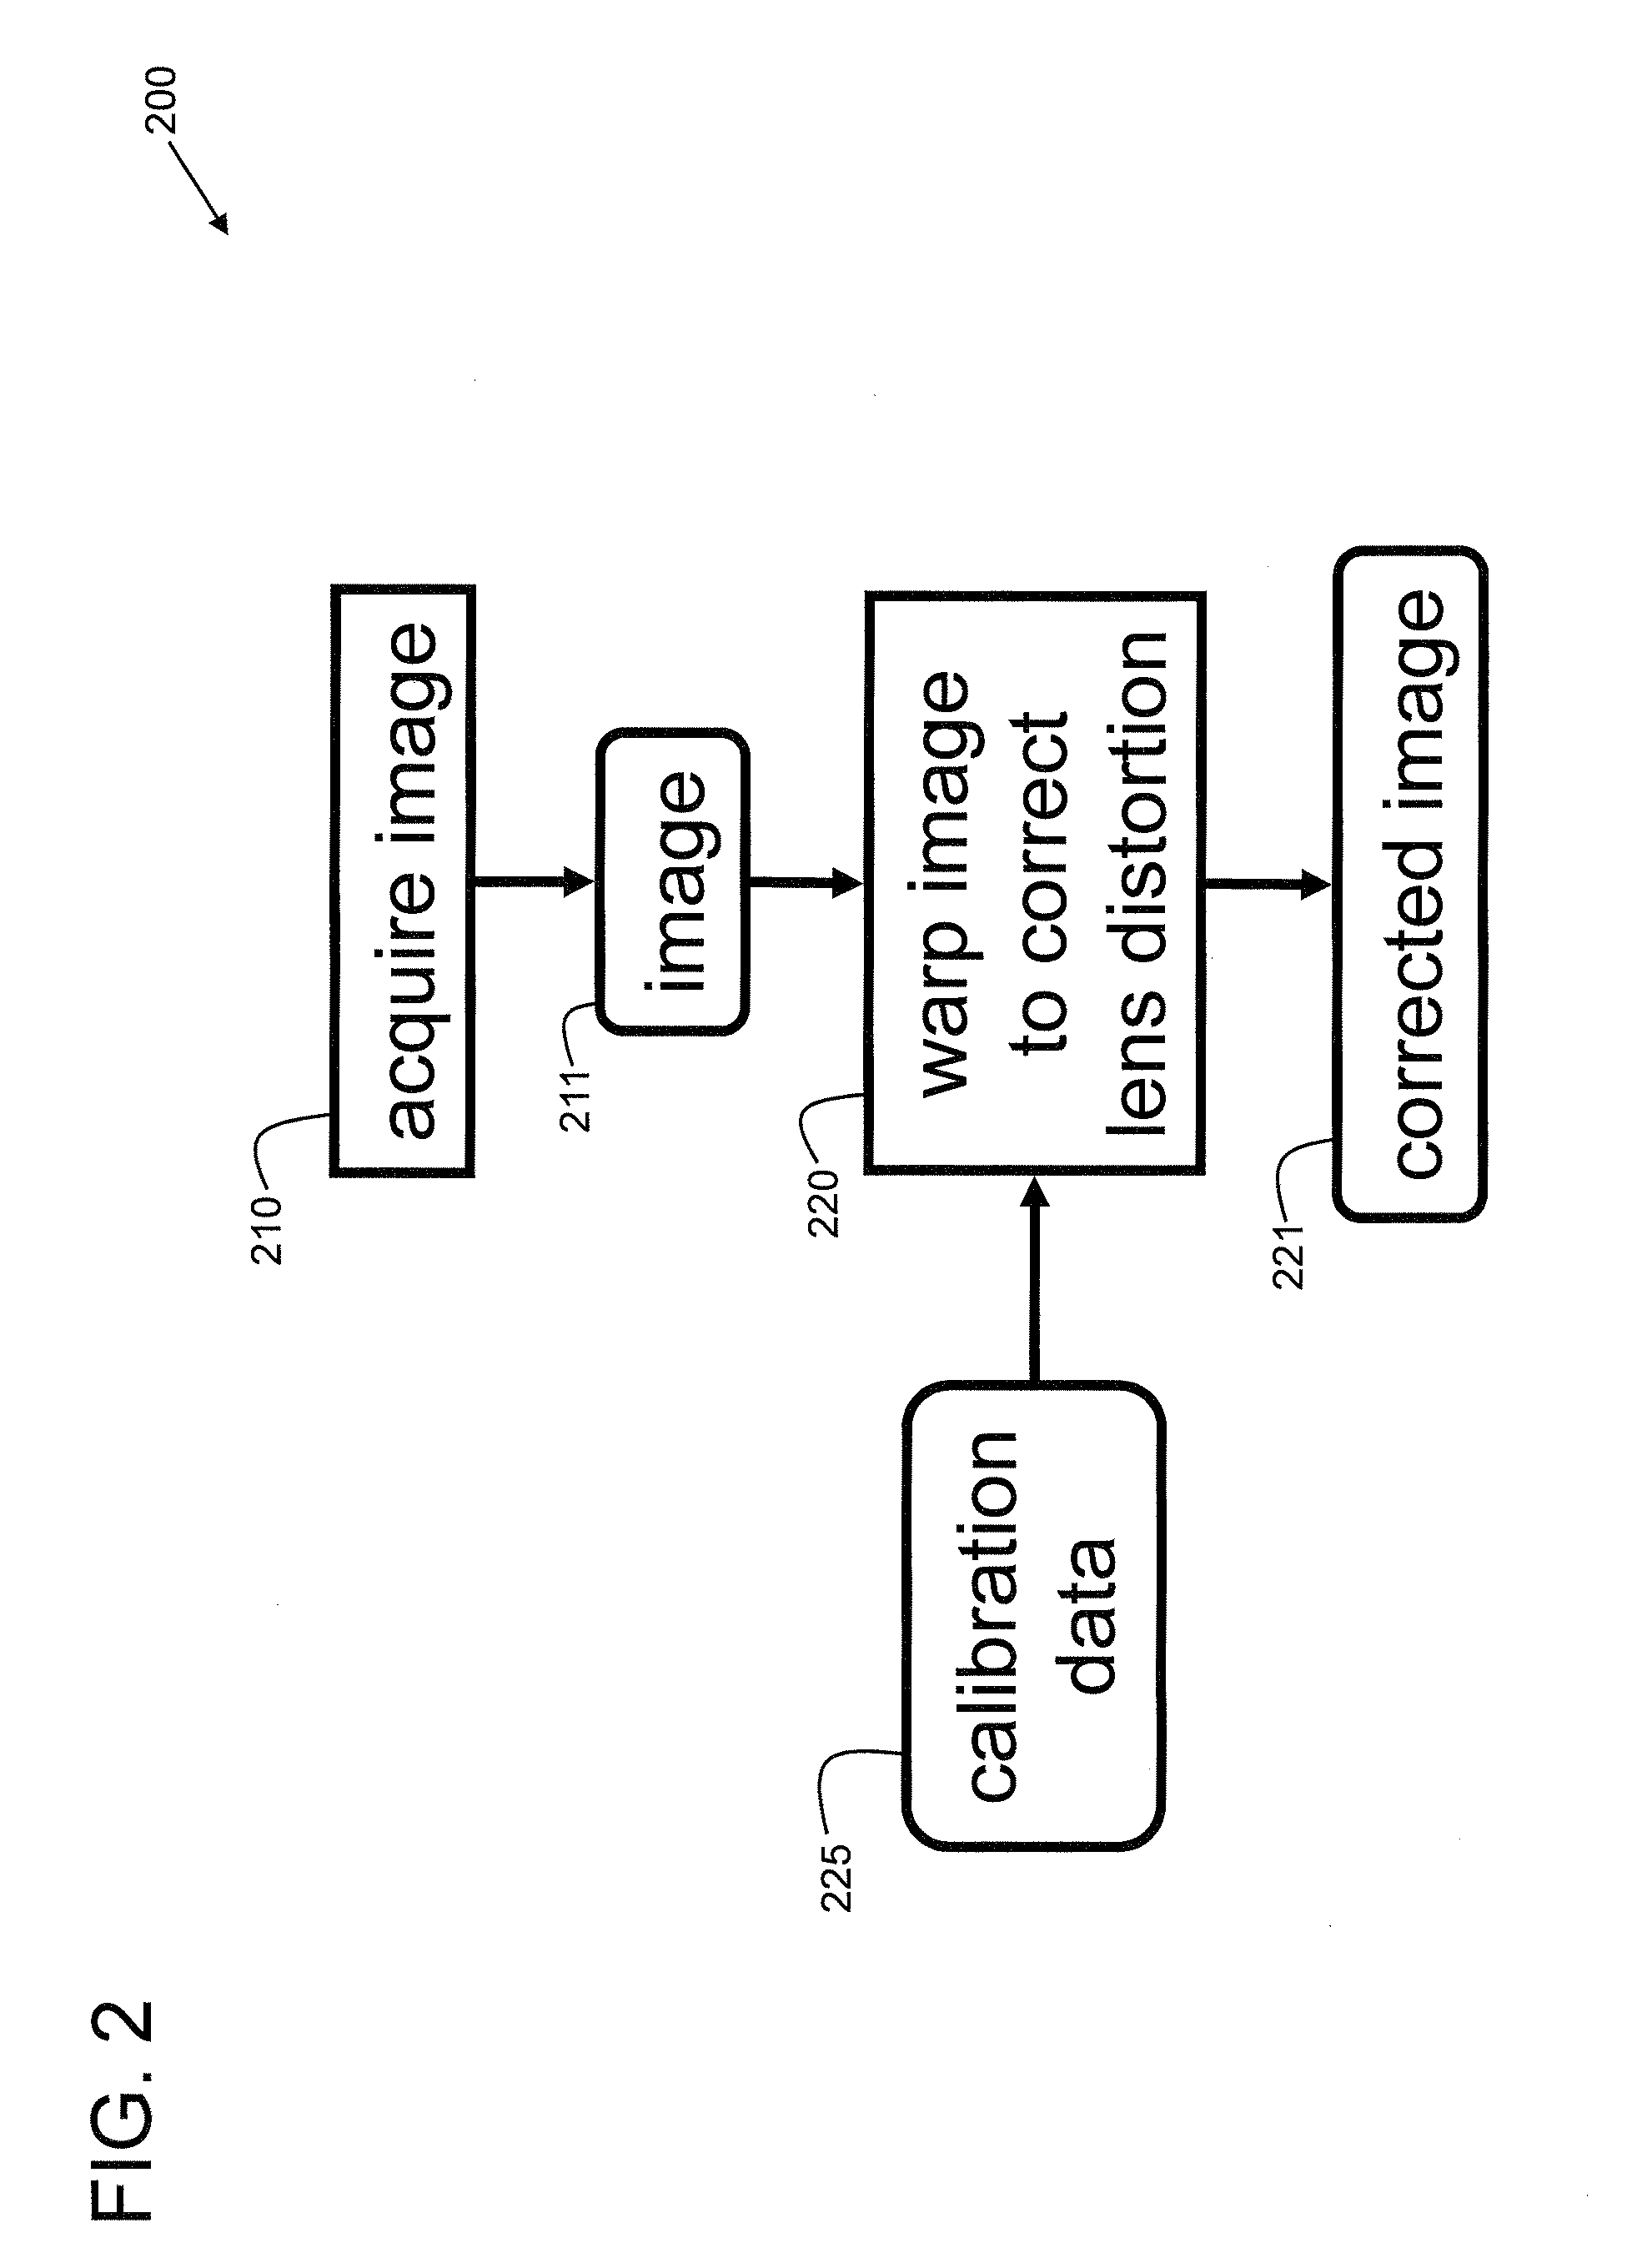 System and method for dimensioning objects using stereoscopic imaging